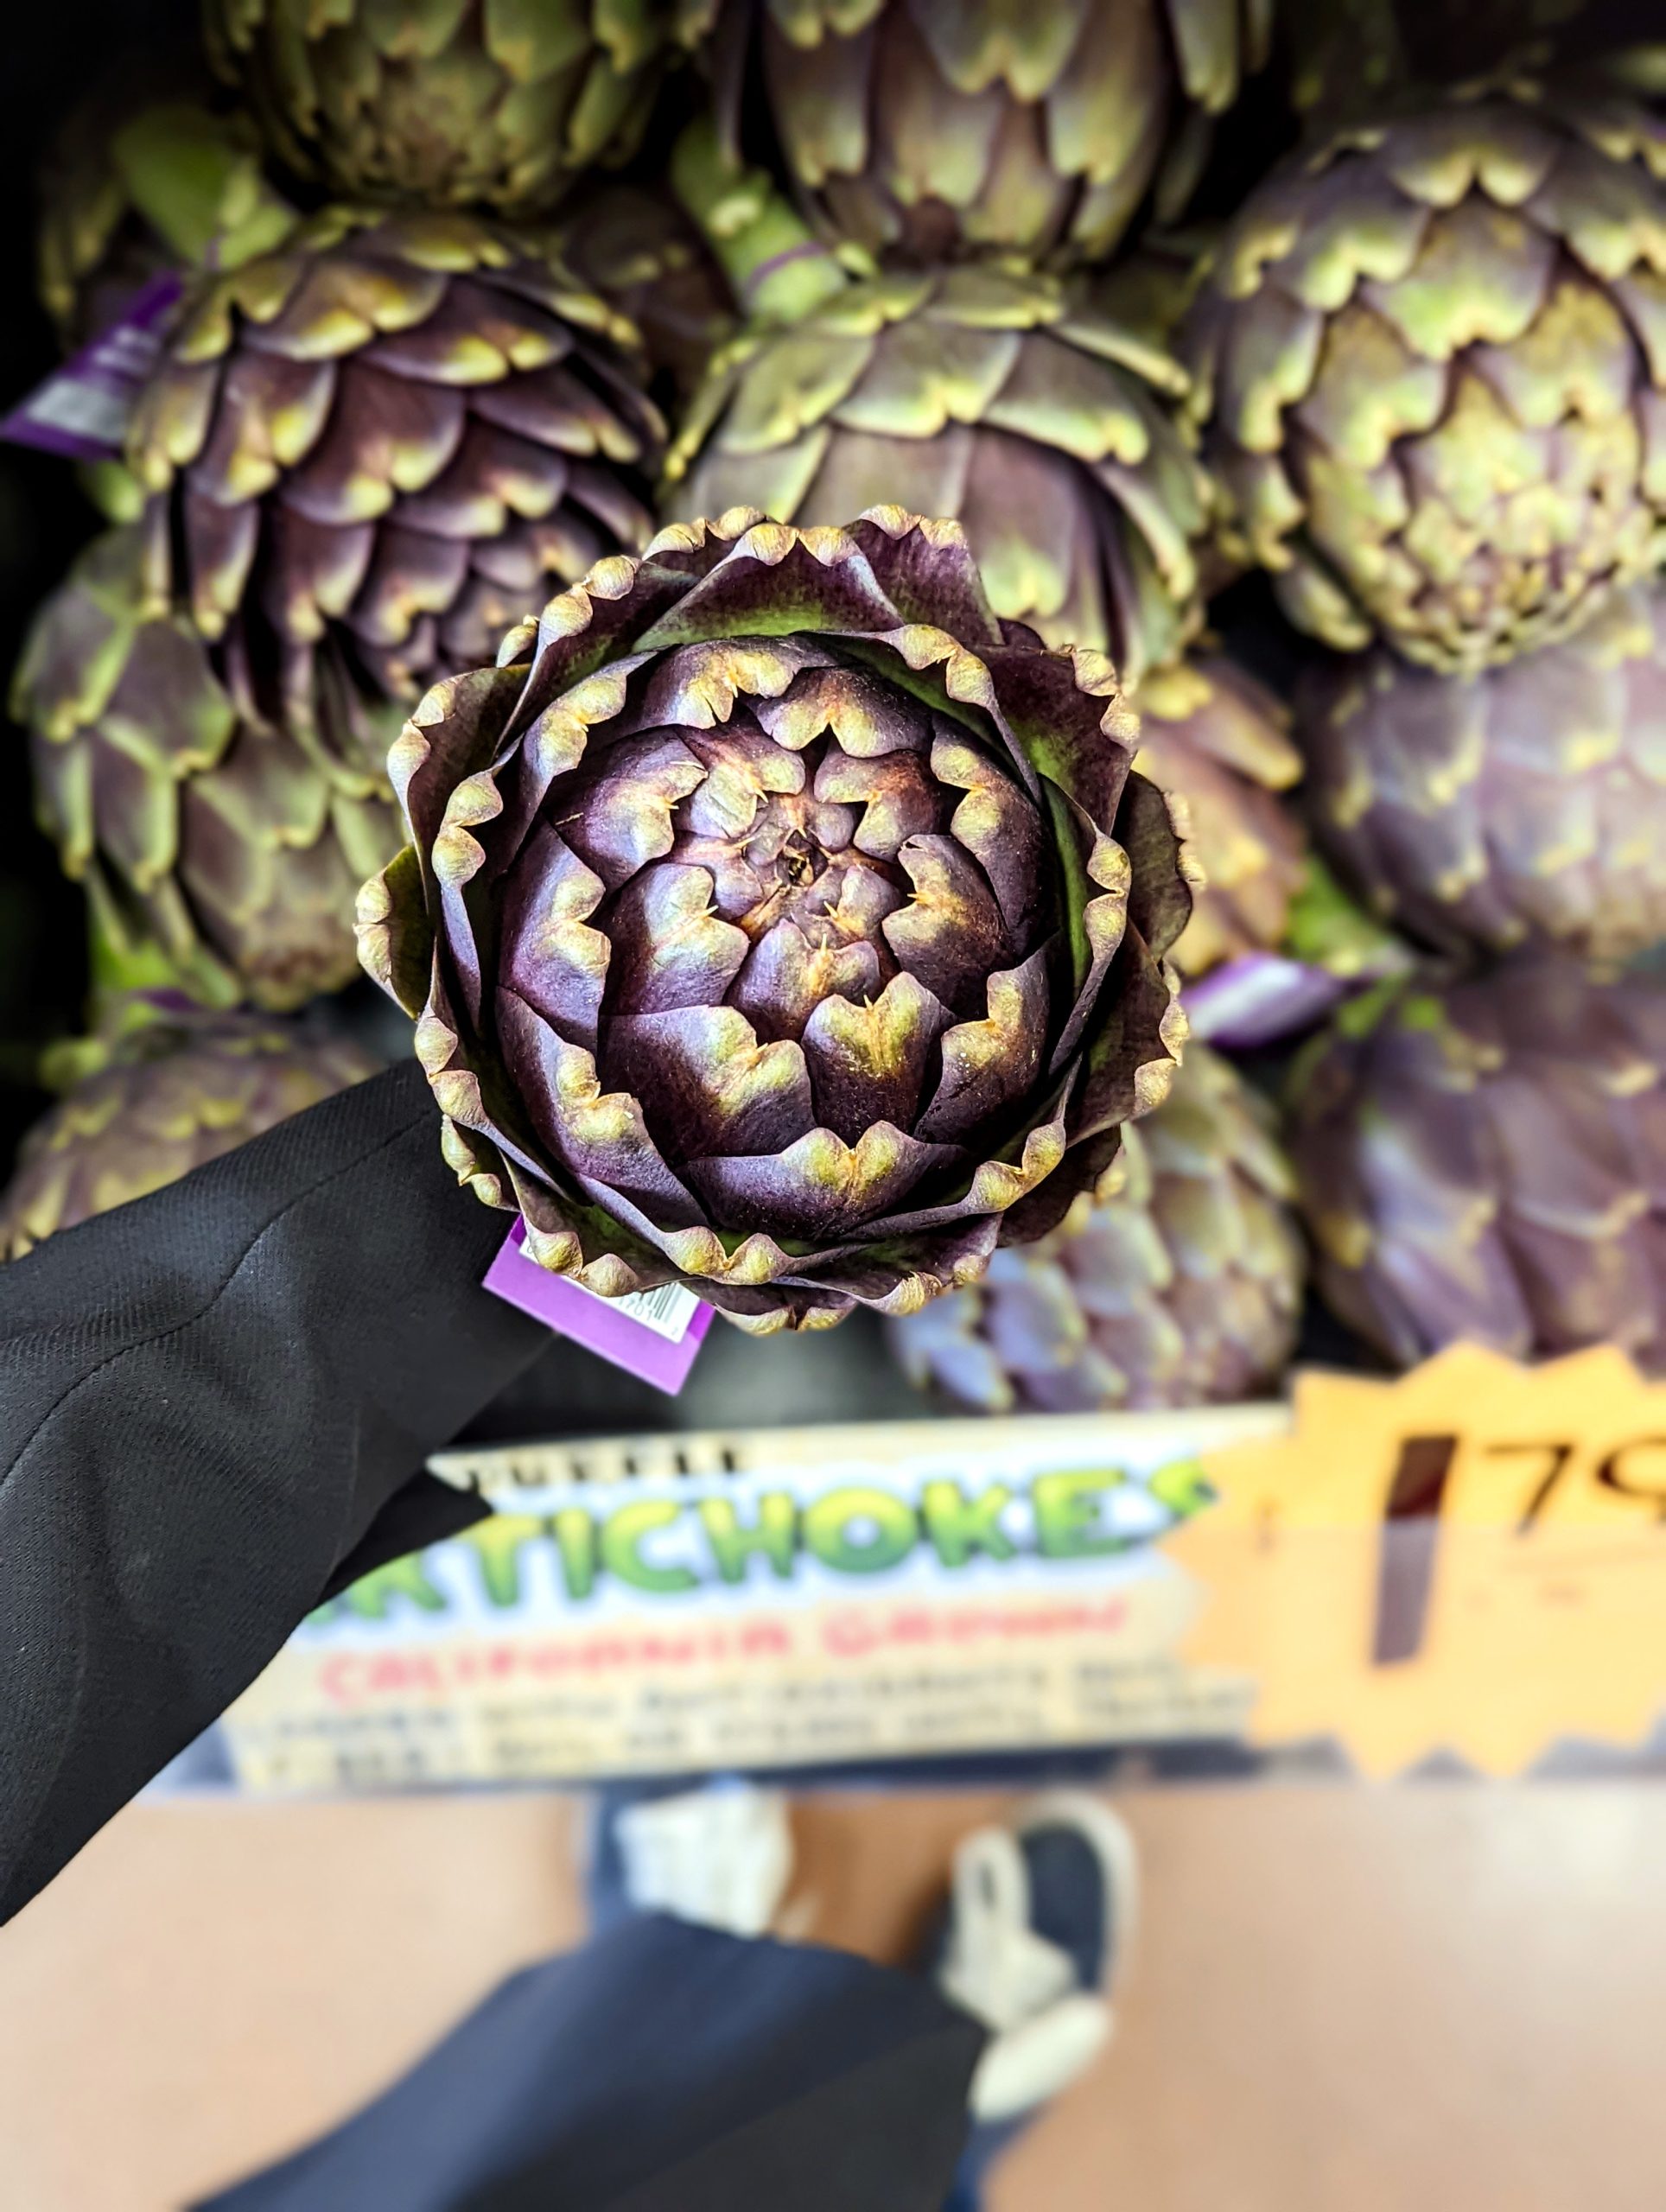 Holding an intricate purple and green artichoke from above like a flower.